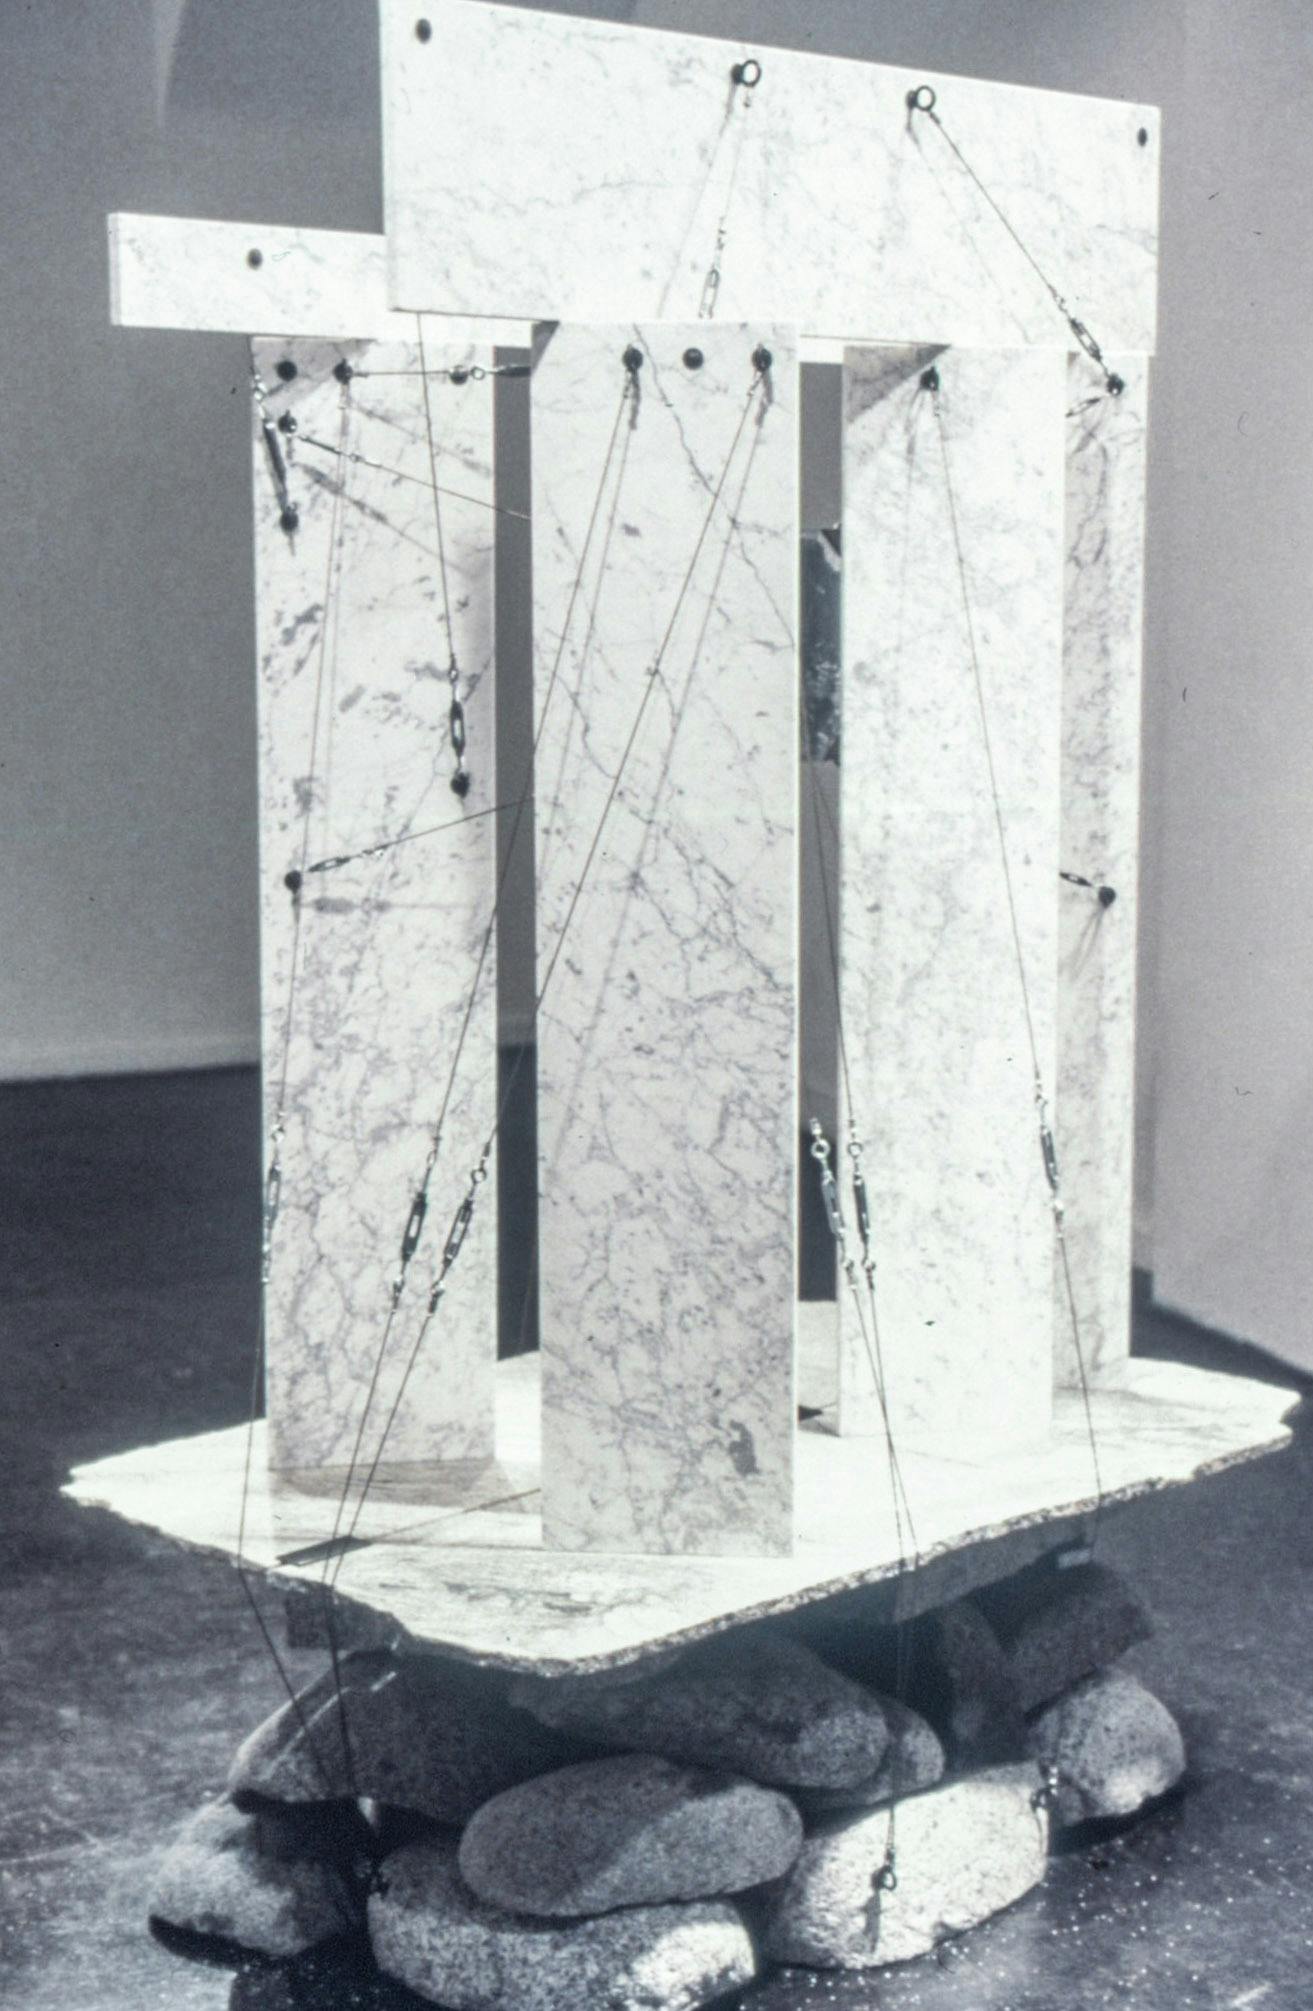 A closeup of a sculpture in a gallery. It is made of several marble slabs stacked vertically and horizontally, resting on a pile of large rocks. The pieces are attached by metal wire and hardware. 